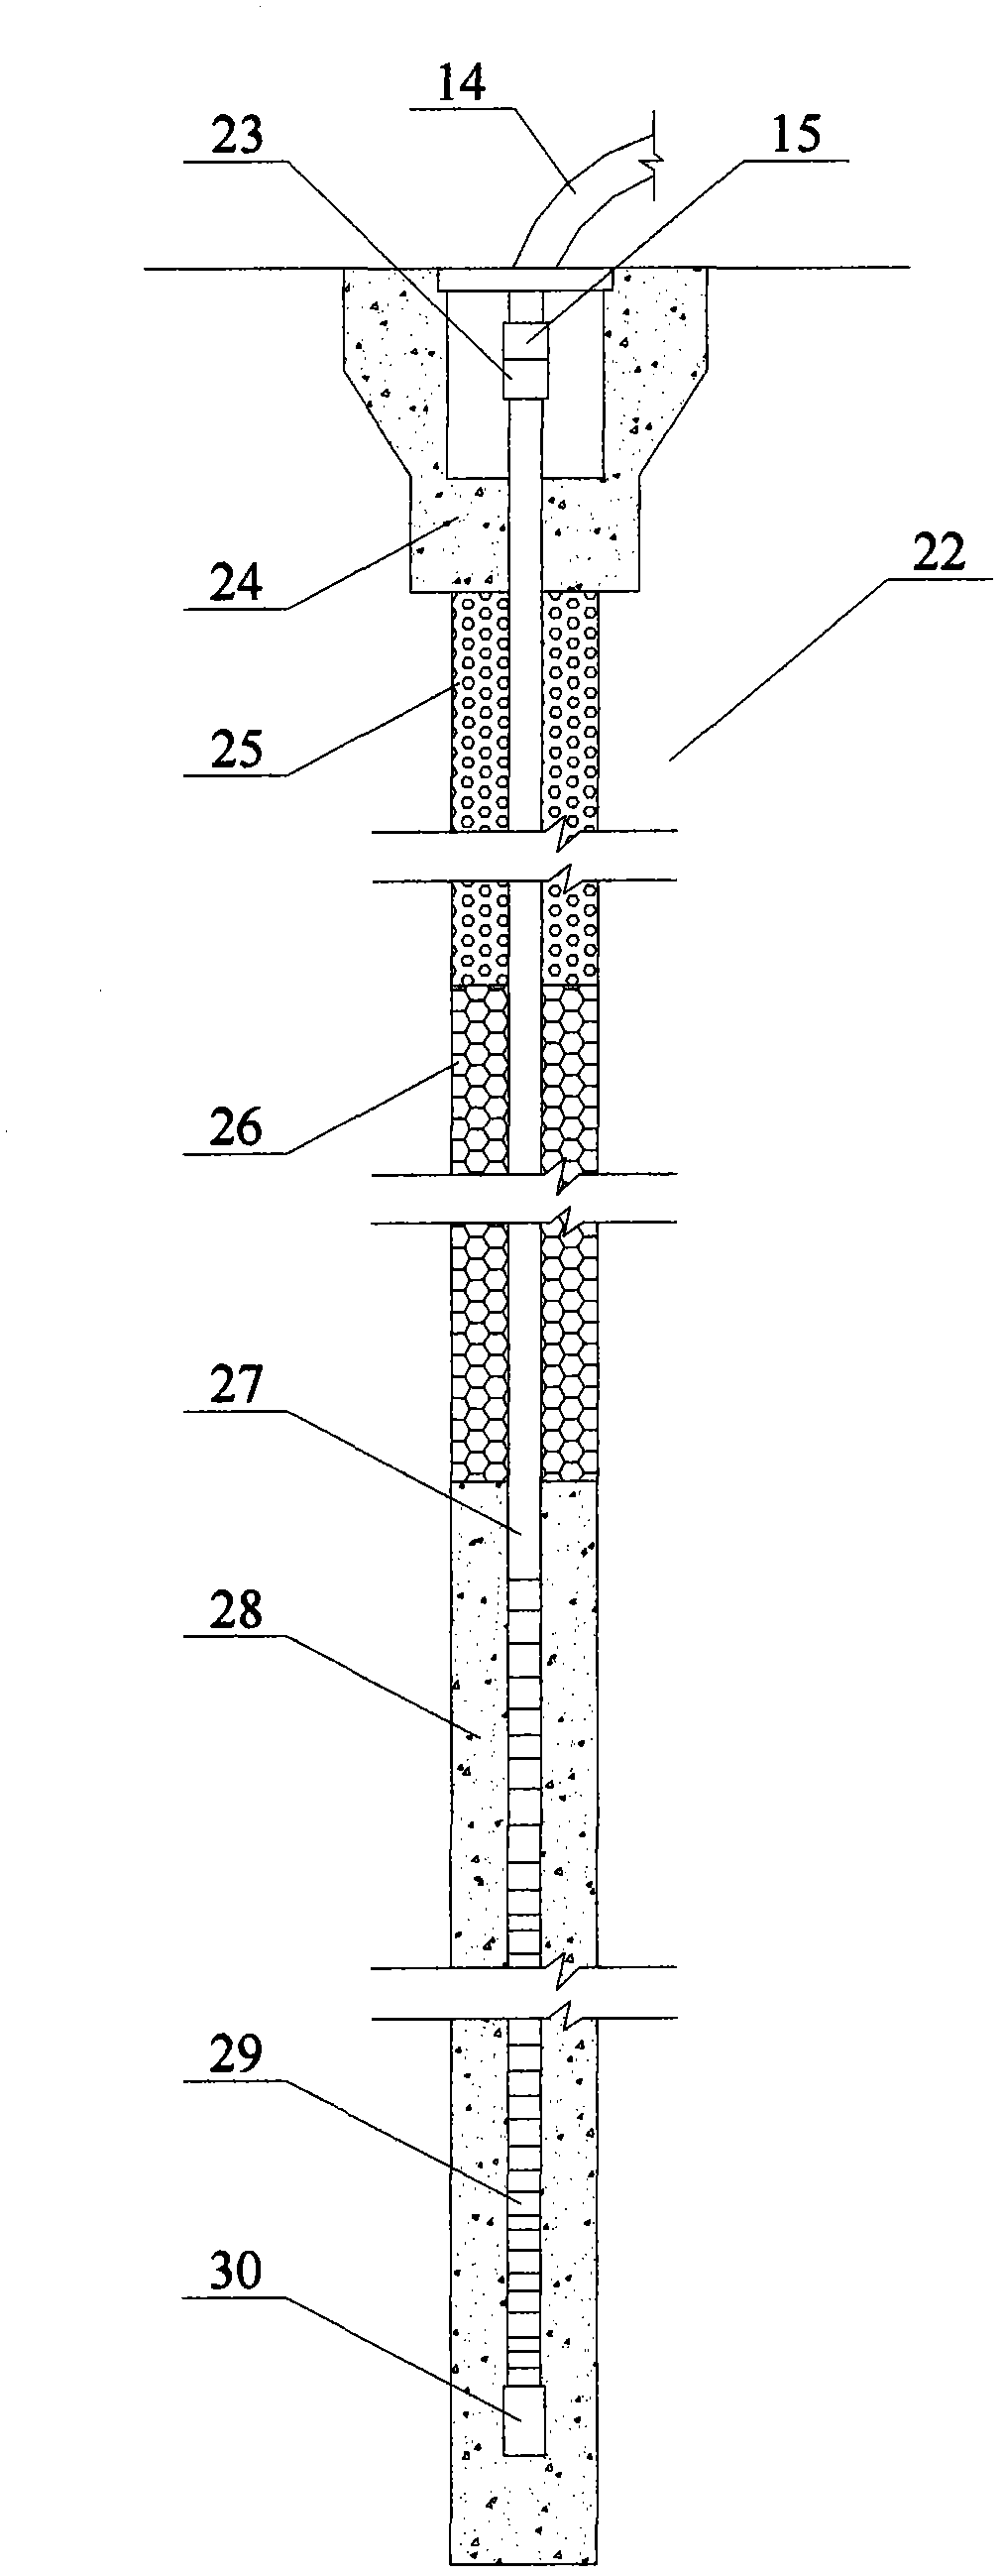 In-situ restoration device and in-situ restoration method of organic polluted soil and underground water